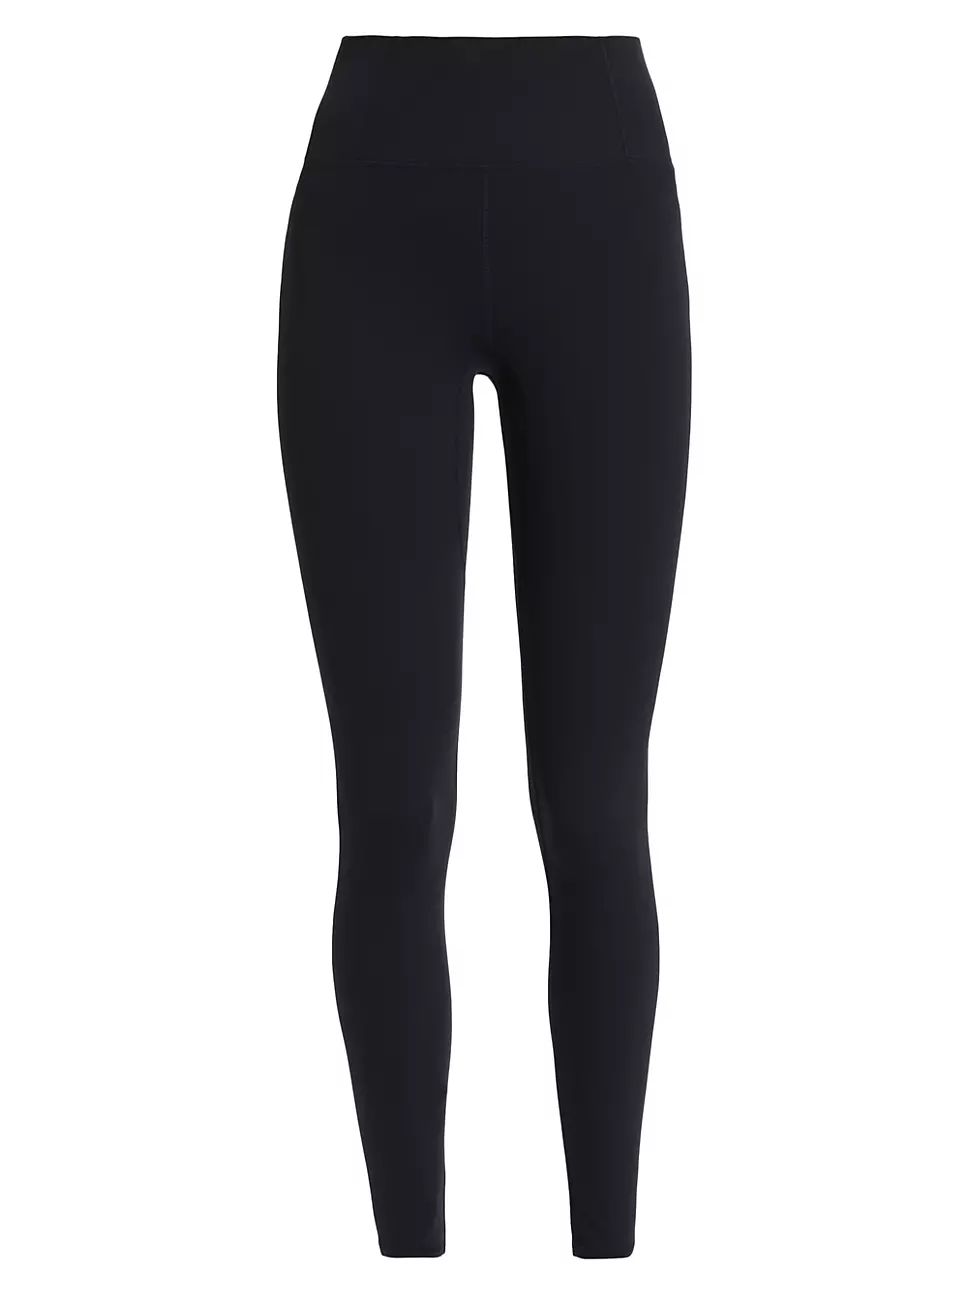 FP Movement Never Better High-Rise Compression Leggings | Saks Fifth Avenue